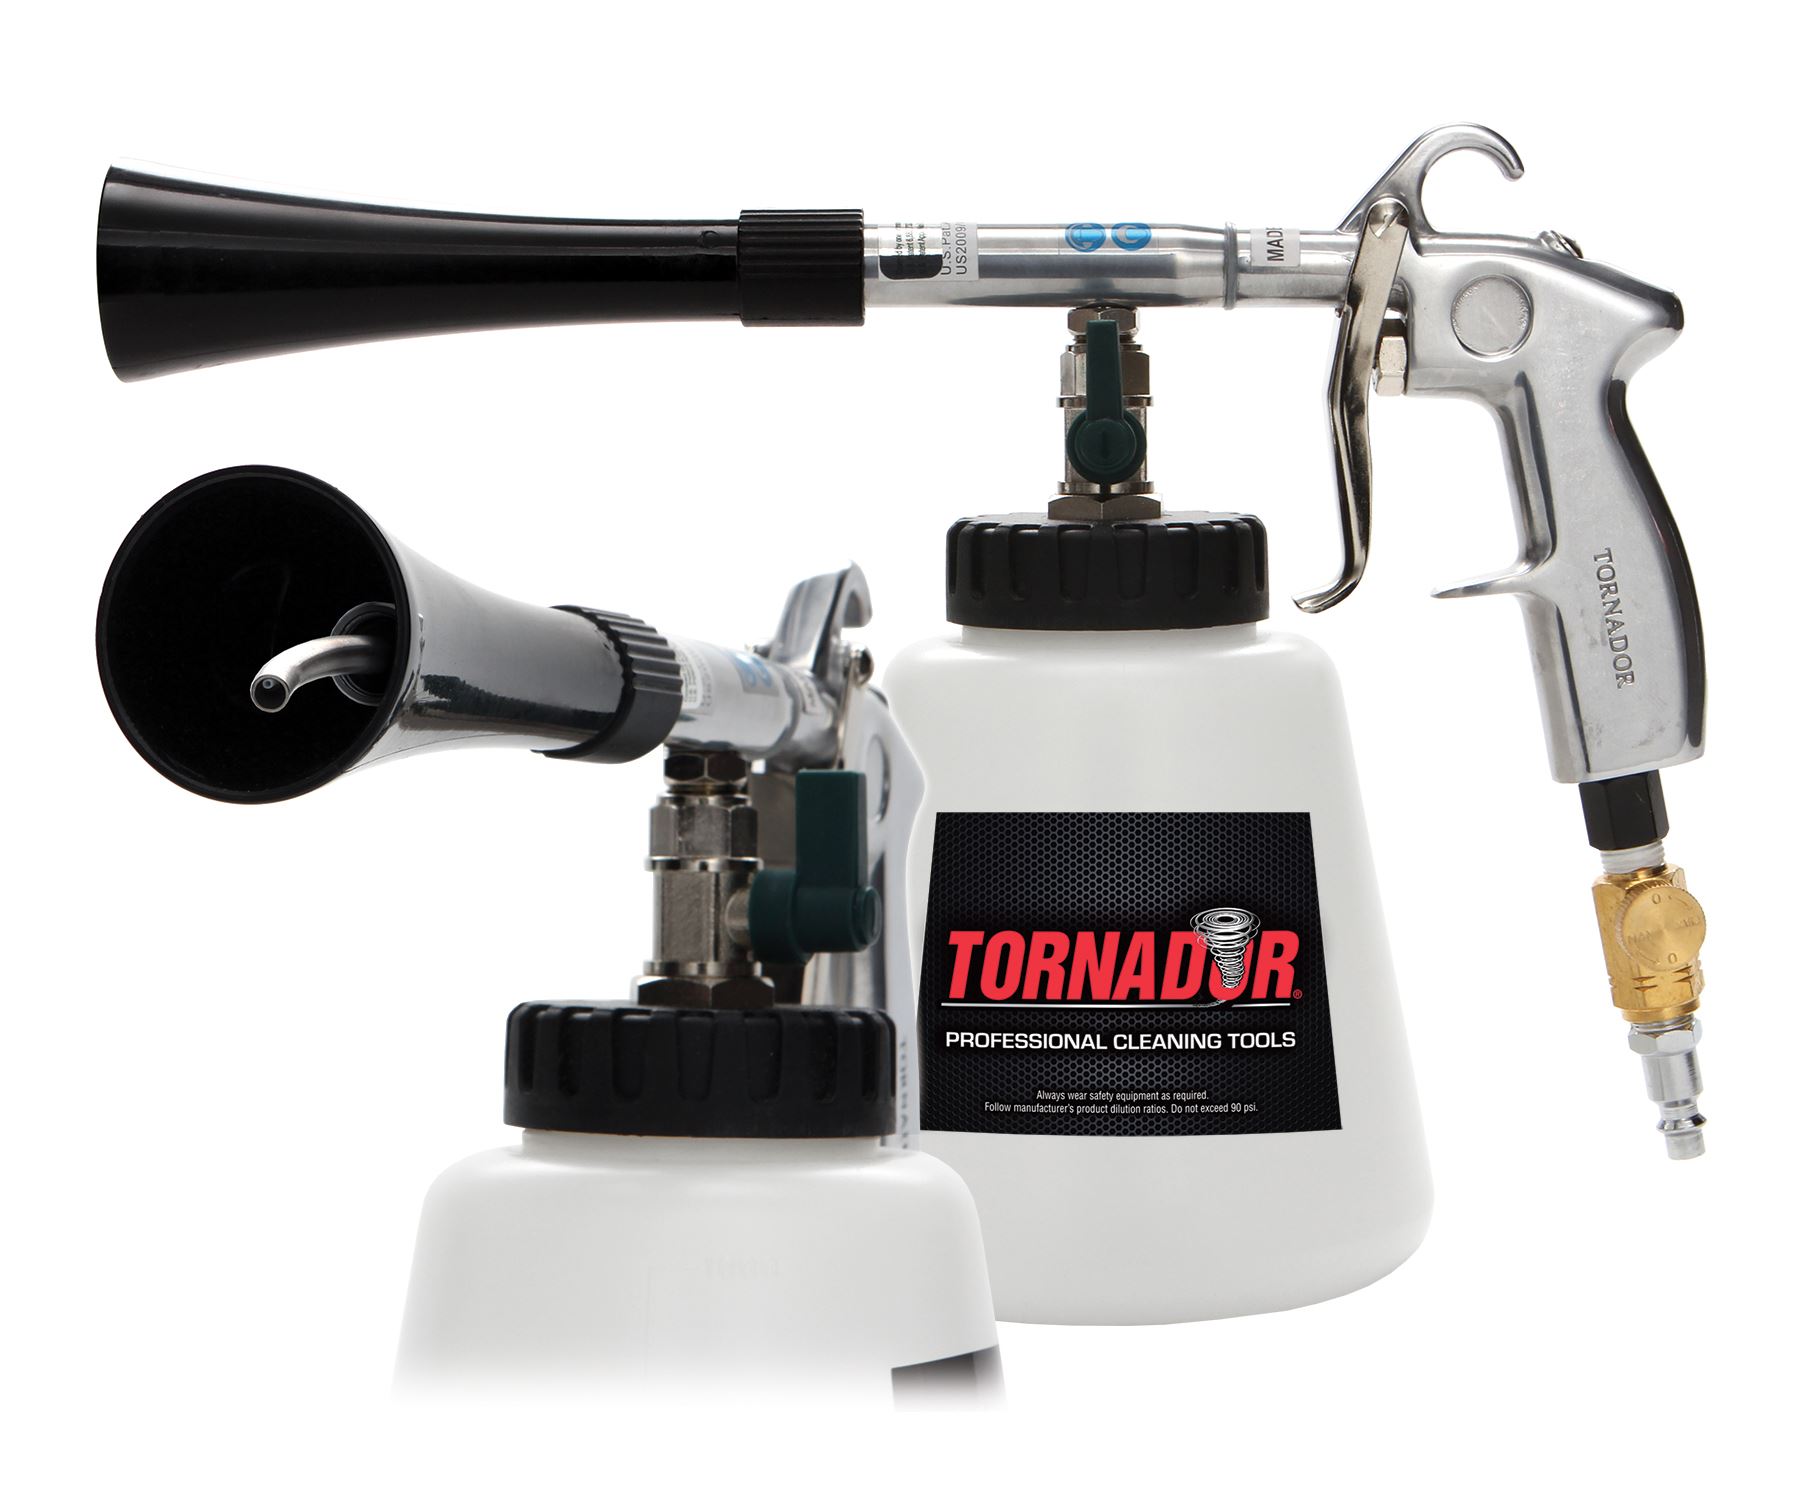  Tornador BLACK Interior Cleaning Tool - Z-020 - More Powerful &  Efficient Than The Tornador Classic : Tools & Home Improvement